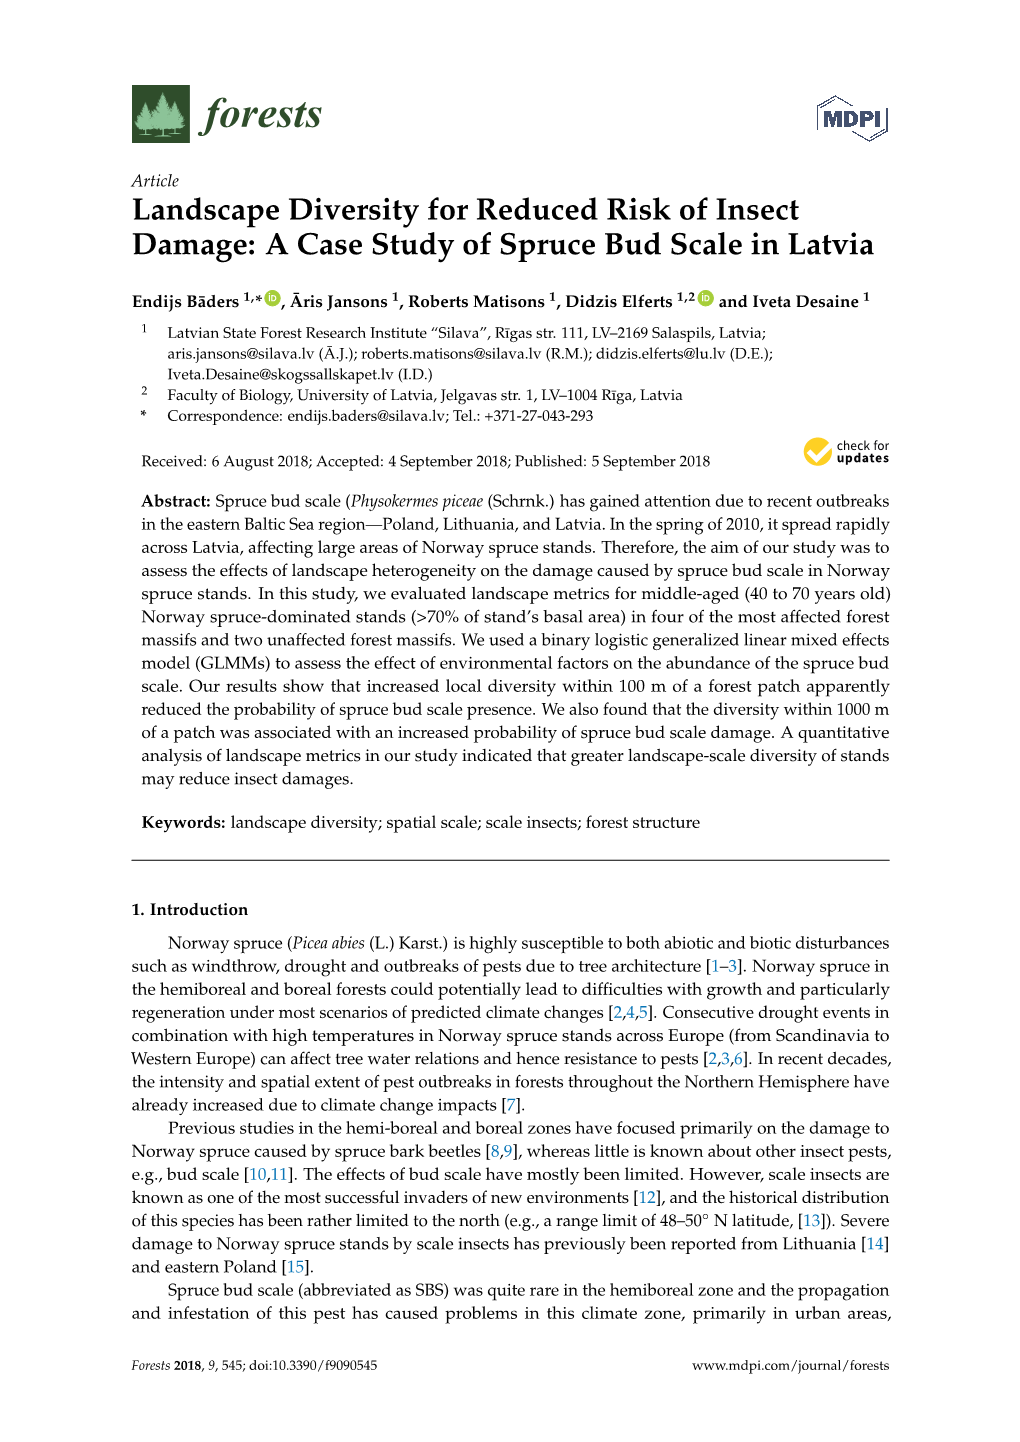 Landscape Diversity for Reduced Risk of Insect Damage: a Case Study of Spruce Bud Scale in Latvia